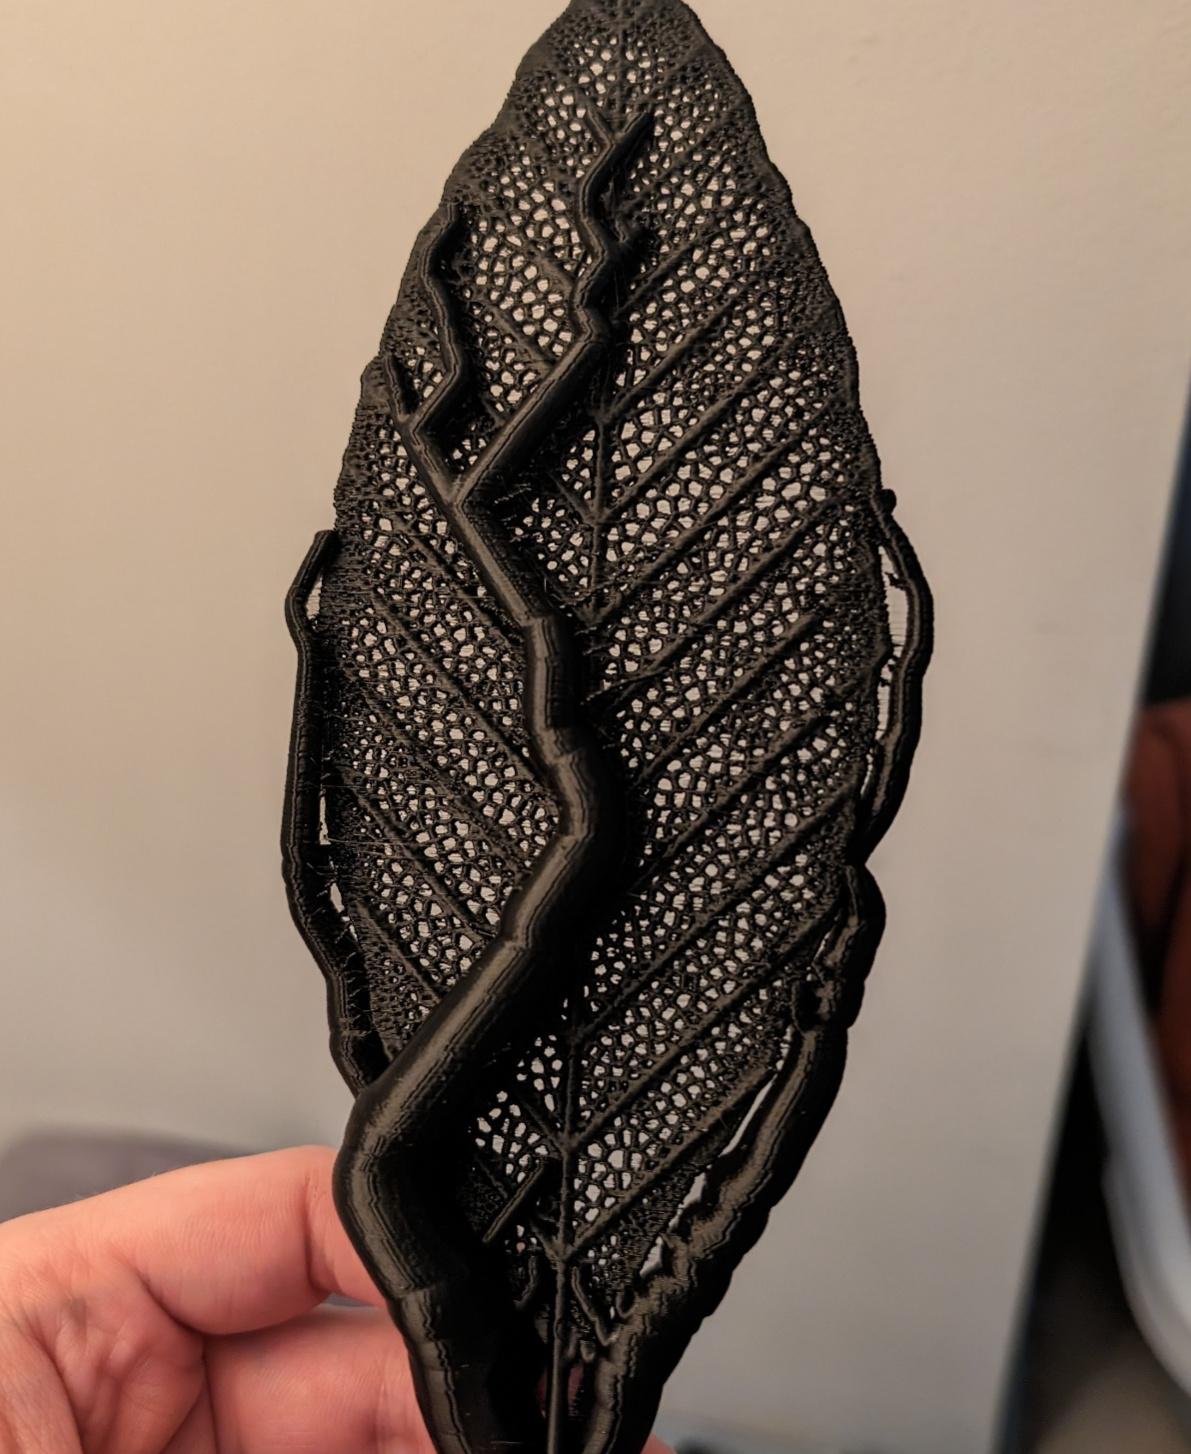 Skeleton Leaves - Willow - First success. 1.5x scale printed vertical - 3d model